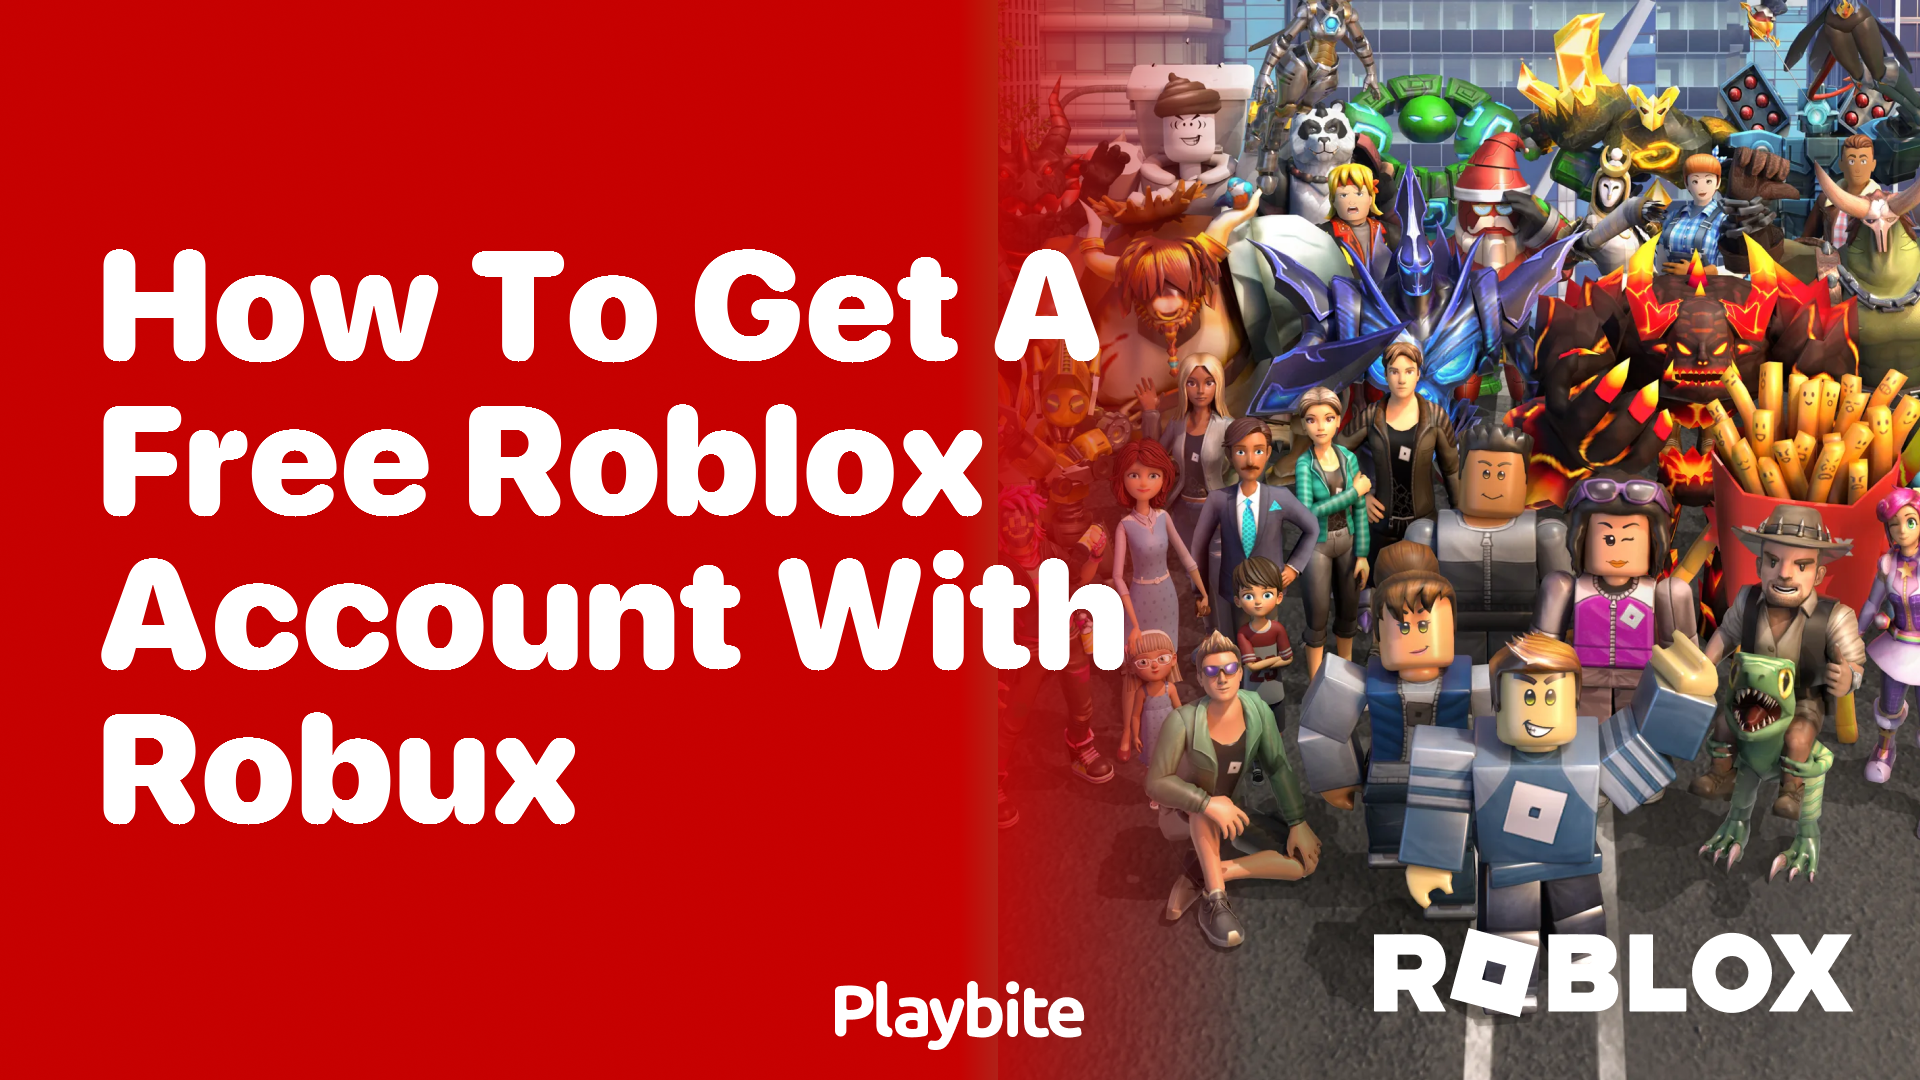 How to Get a Free Roblox Account with Robux